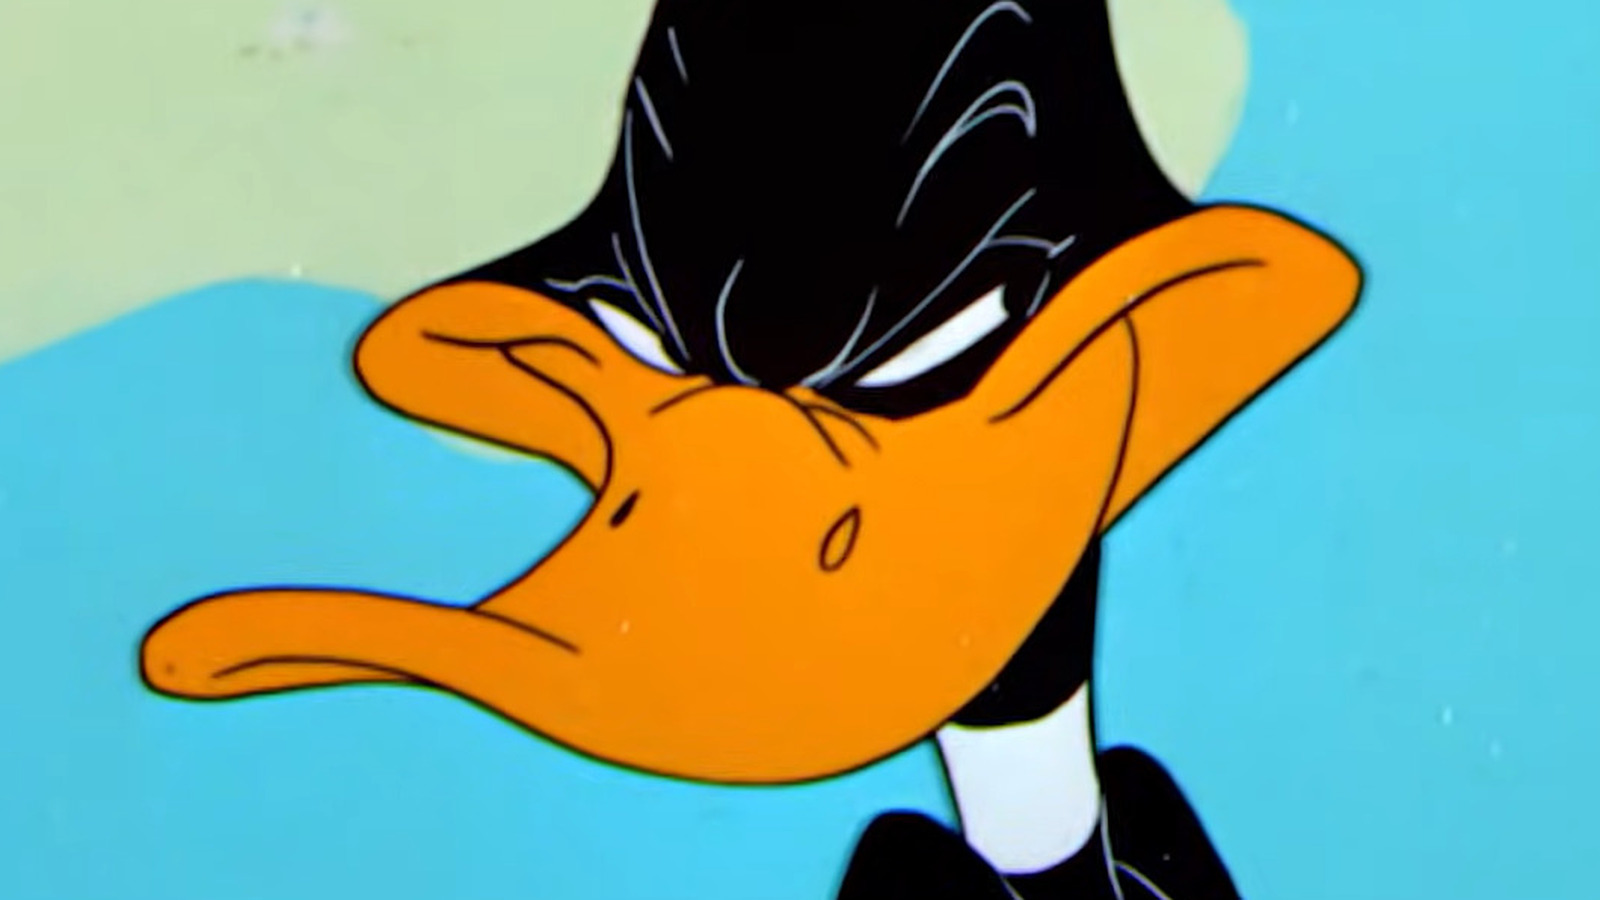 Witch Hazel Disney Porn - 20 Most Popular Looney Tunes Characters Ranked Worst To Best